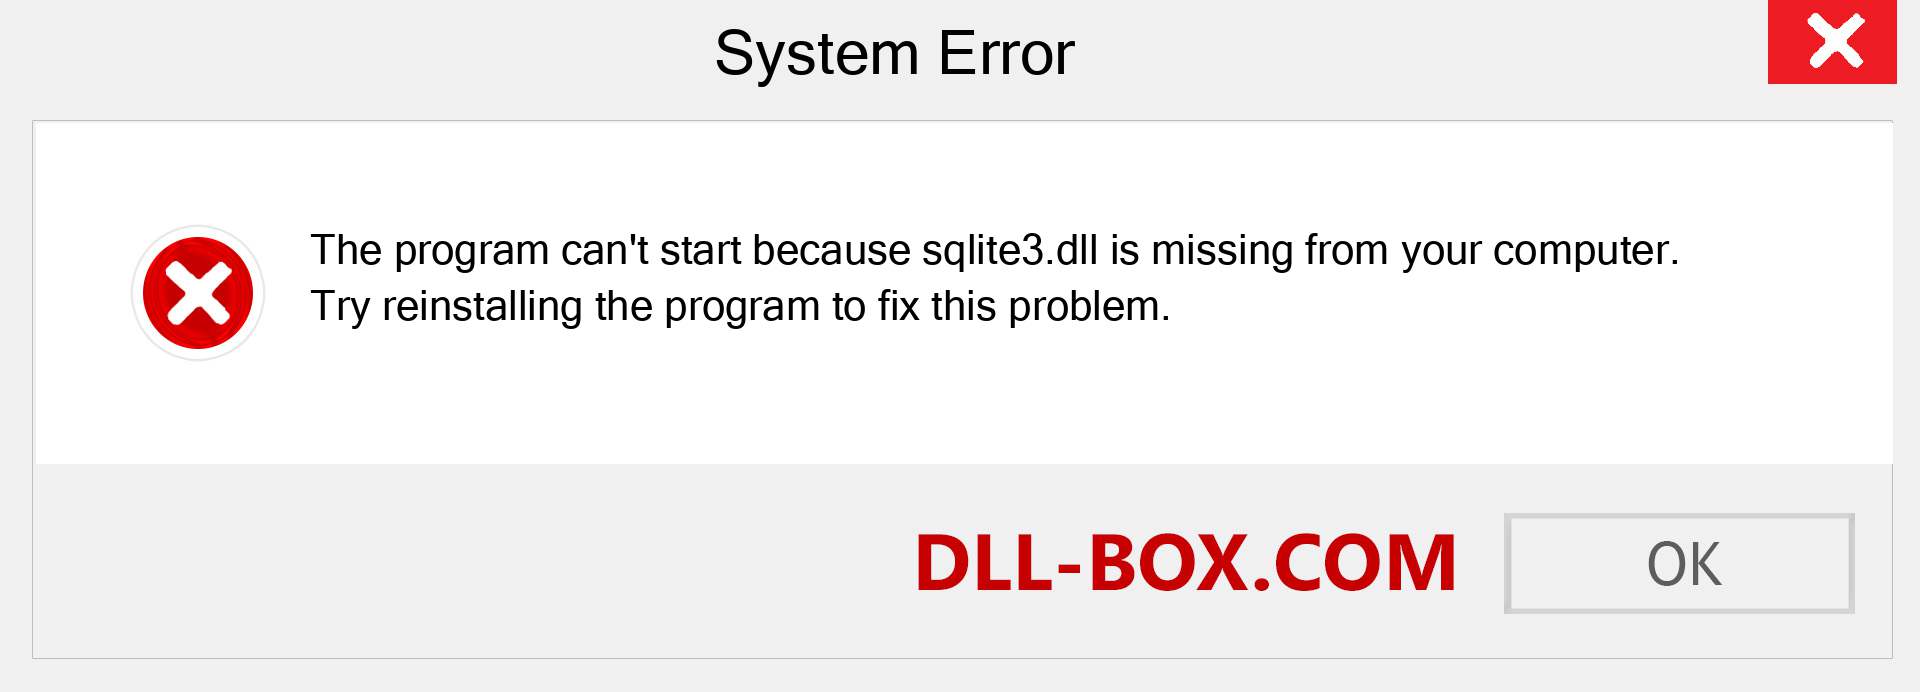  sqlite3.dll file is missing?. Download for Windows 7, 8, 10 - Fix  sqlite3 dll Missing Error on Windows, photos, images